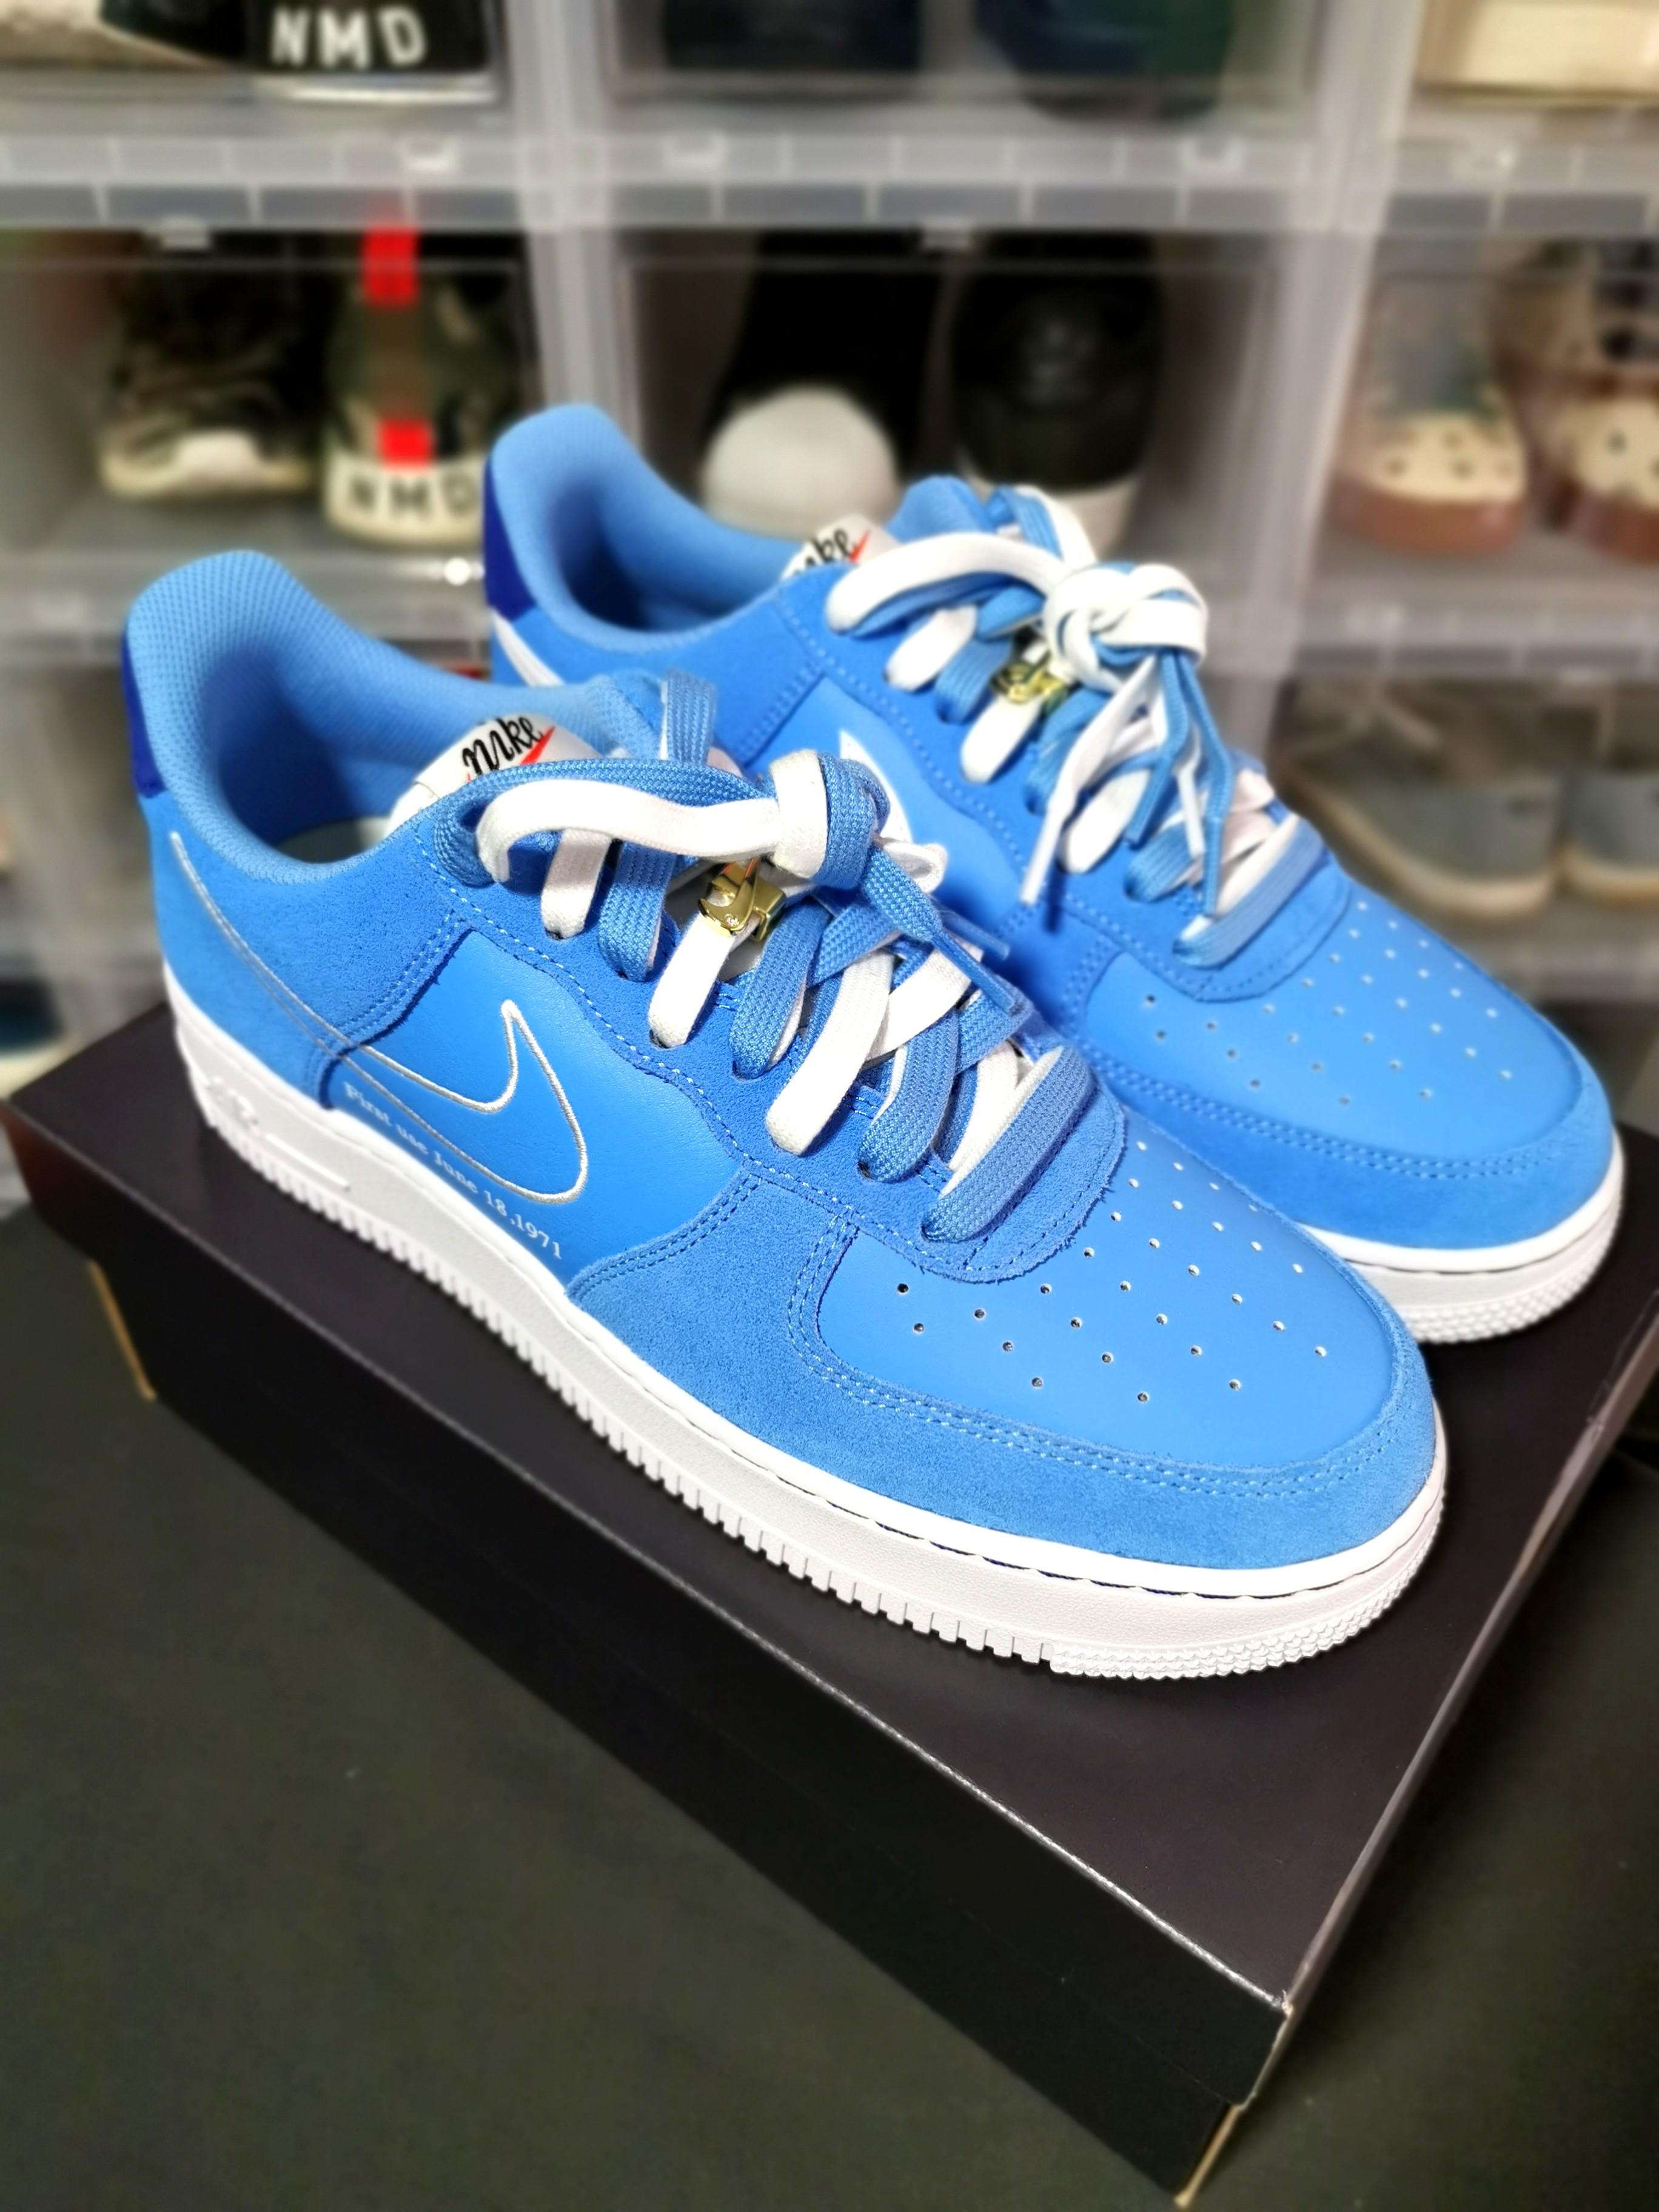 Nike Air Force 1 '07 First Use University Blue